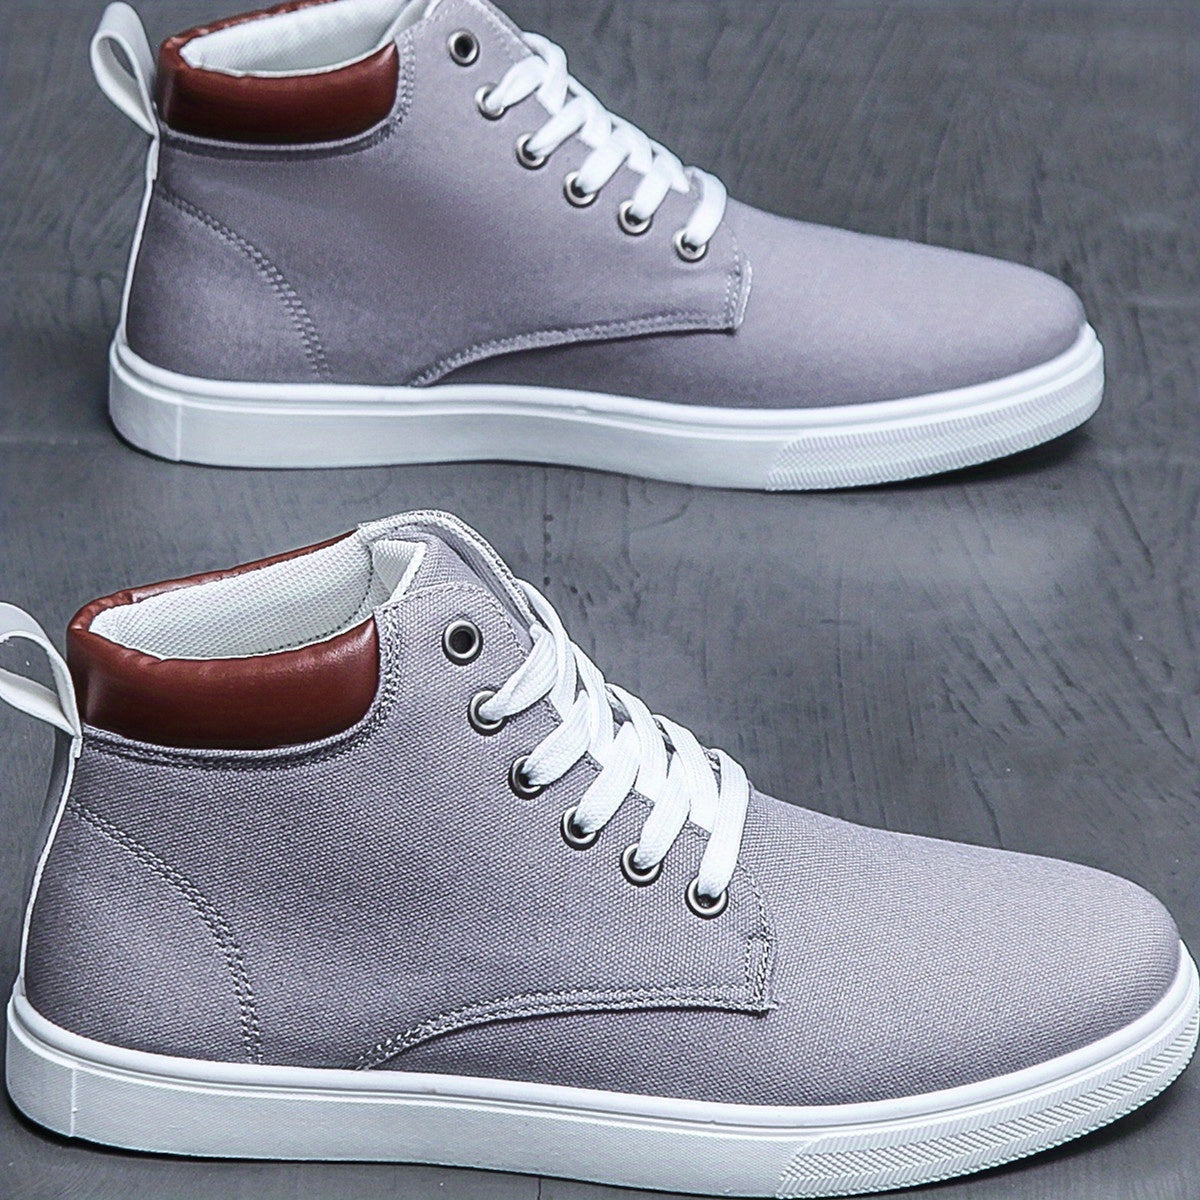 Canvas Skate Shoes With Good Traction, Men's Lace-up High Top Sneakers, Breathable , For Halloween